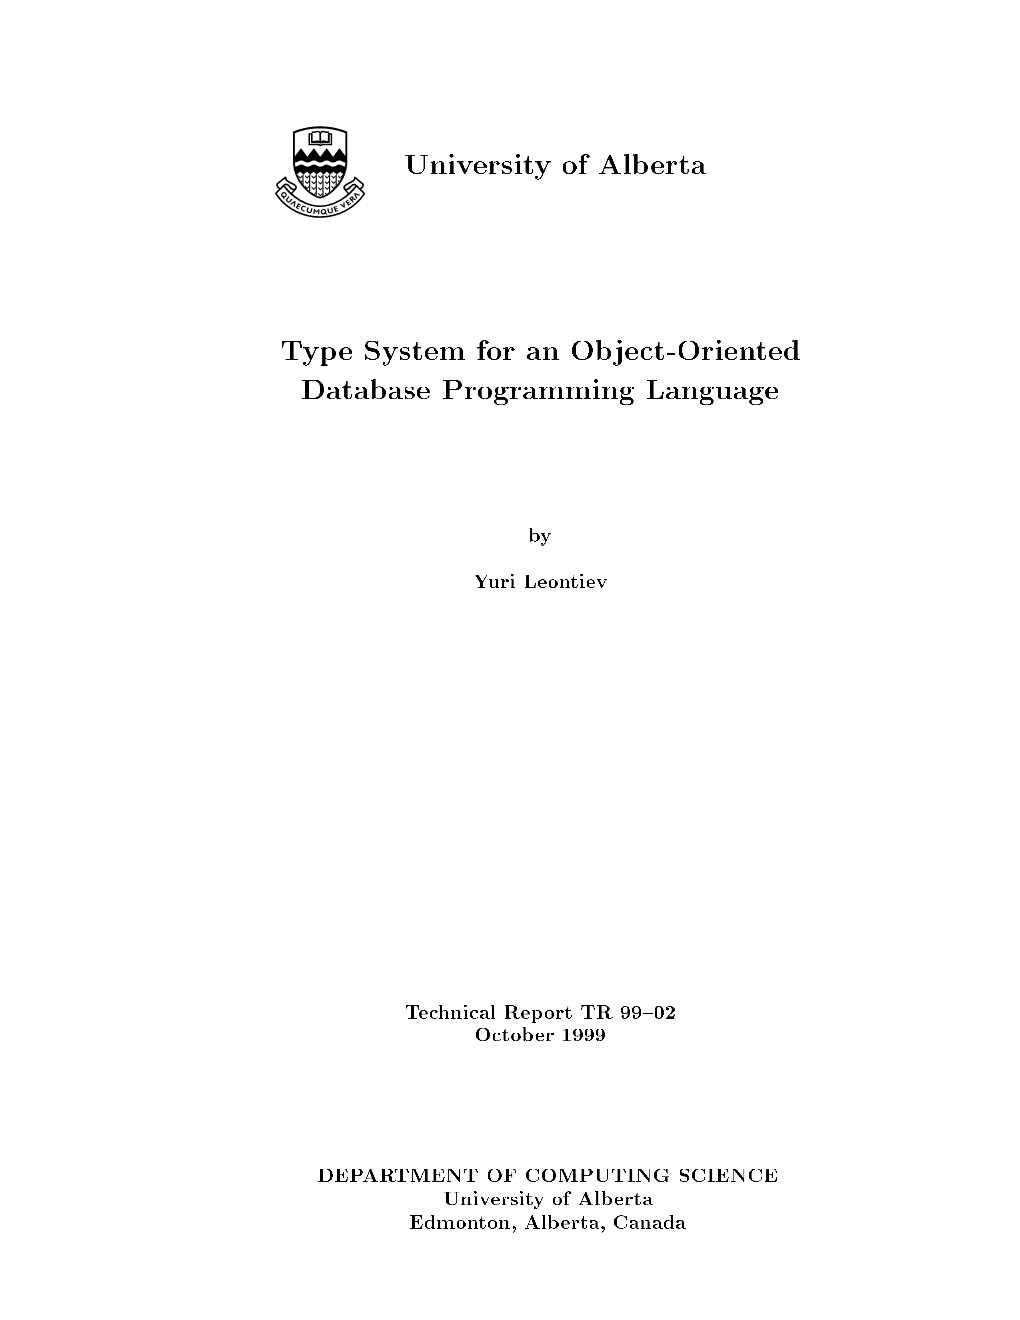 University of Alberta Type System for an Object-Oriented Database Programming Language